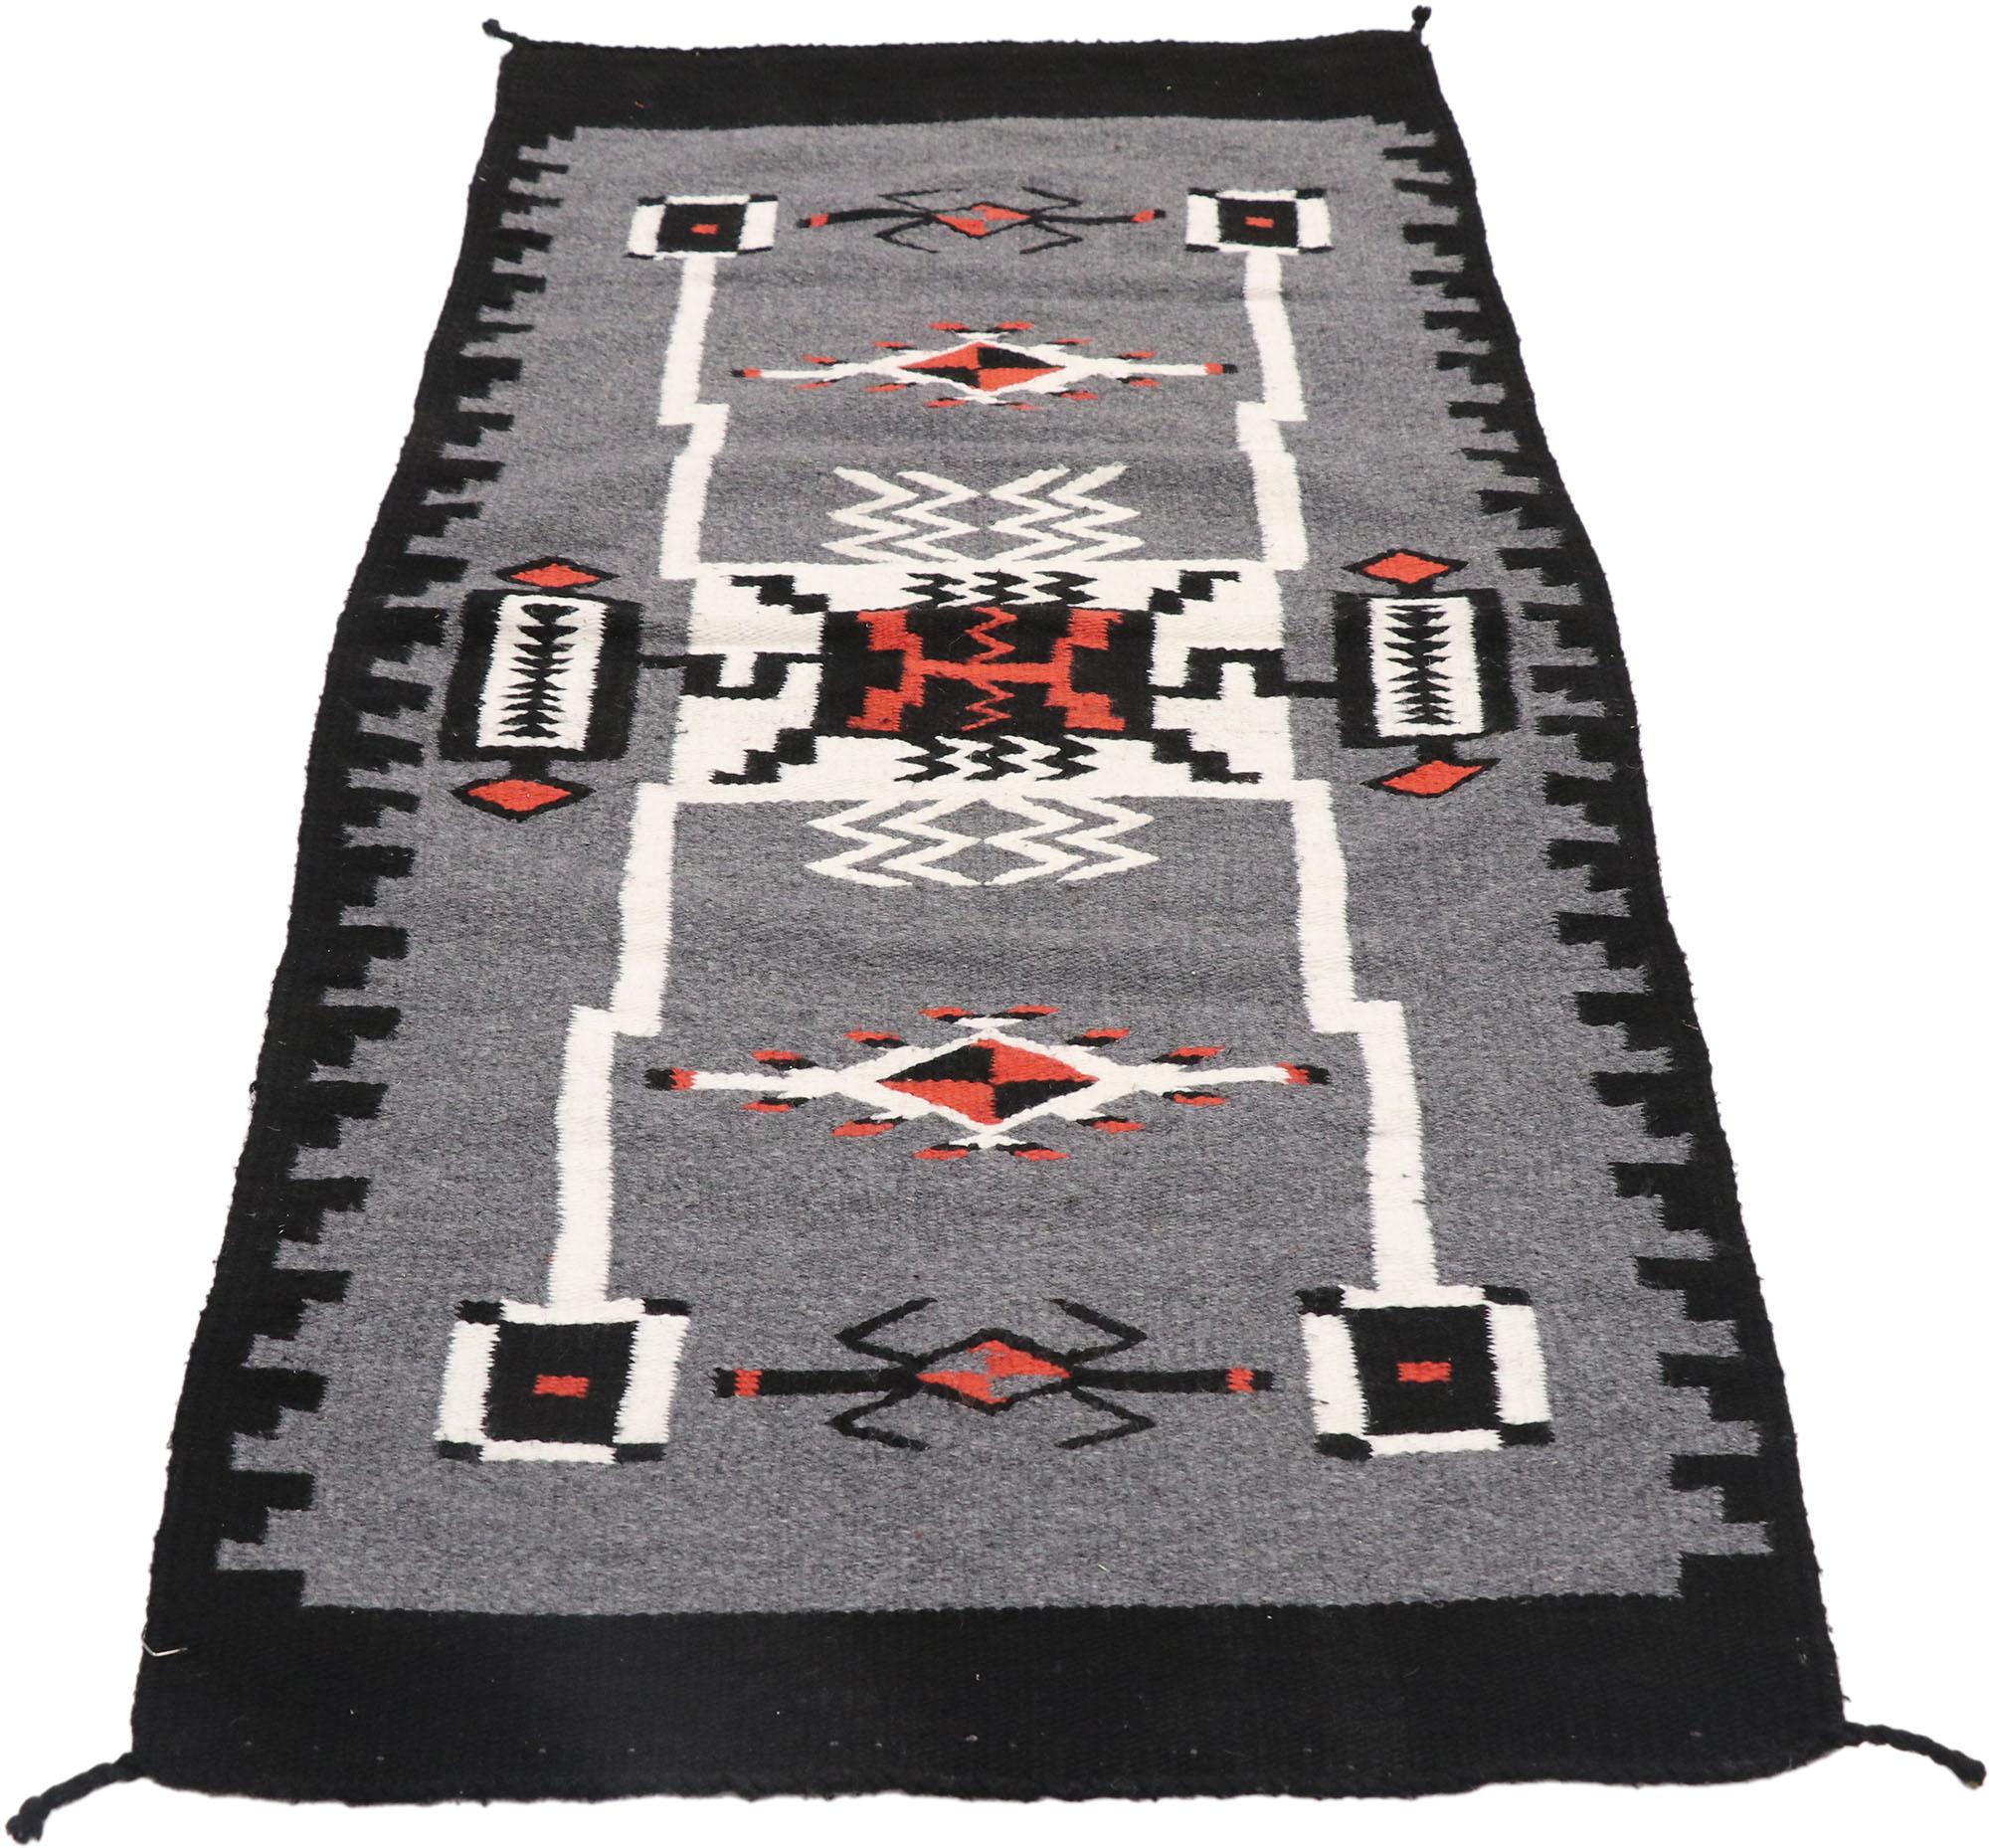 77959 Vintage Navajo Storm Pattern Kilim rug with Two Grey Hills Style 02'05 x 04'11. With its bold expressive design, incredible detail and texture, this hand-woven wool vintage Navajo Storm Pattern Kilim rug is a captivating vision of woven beauty